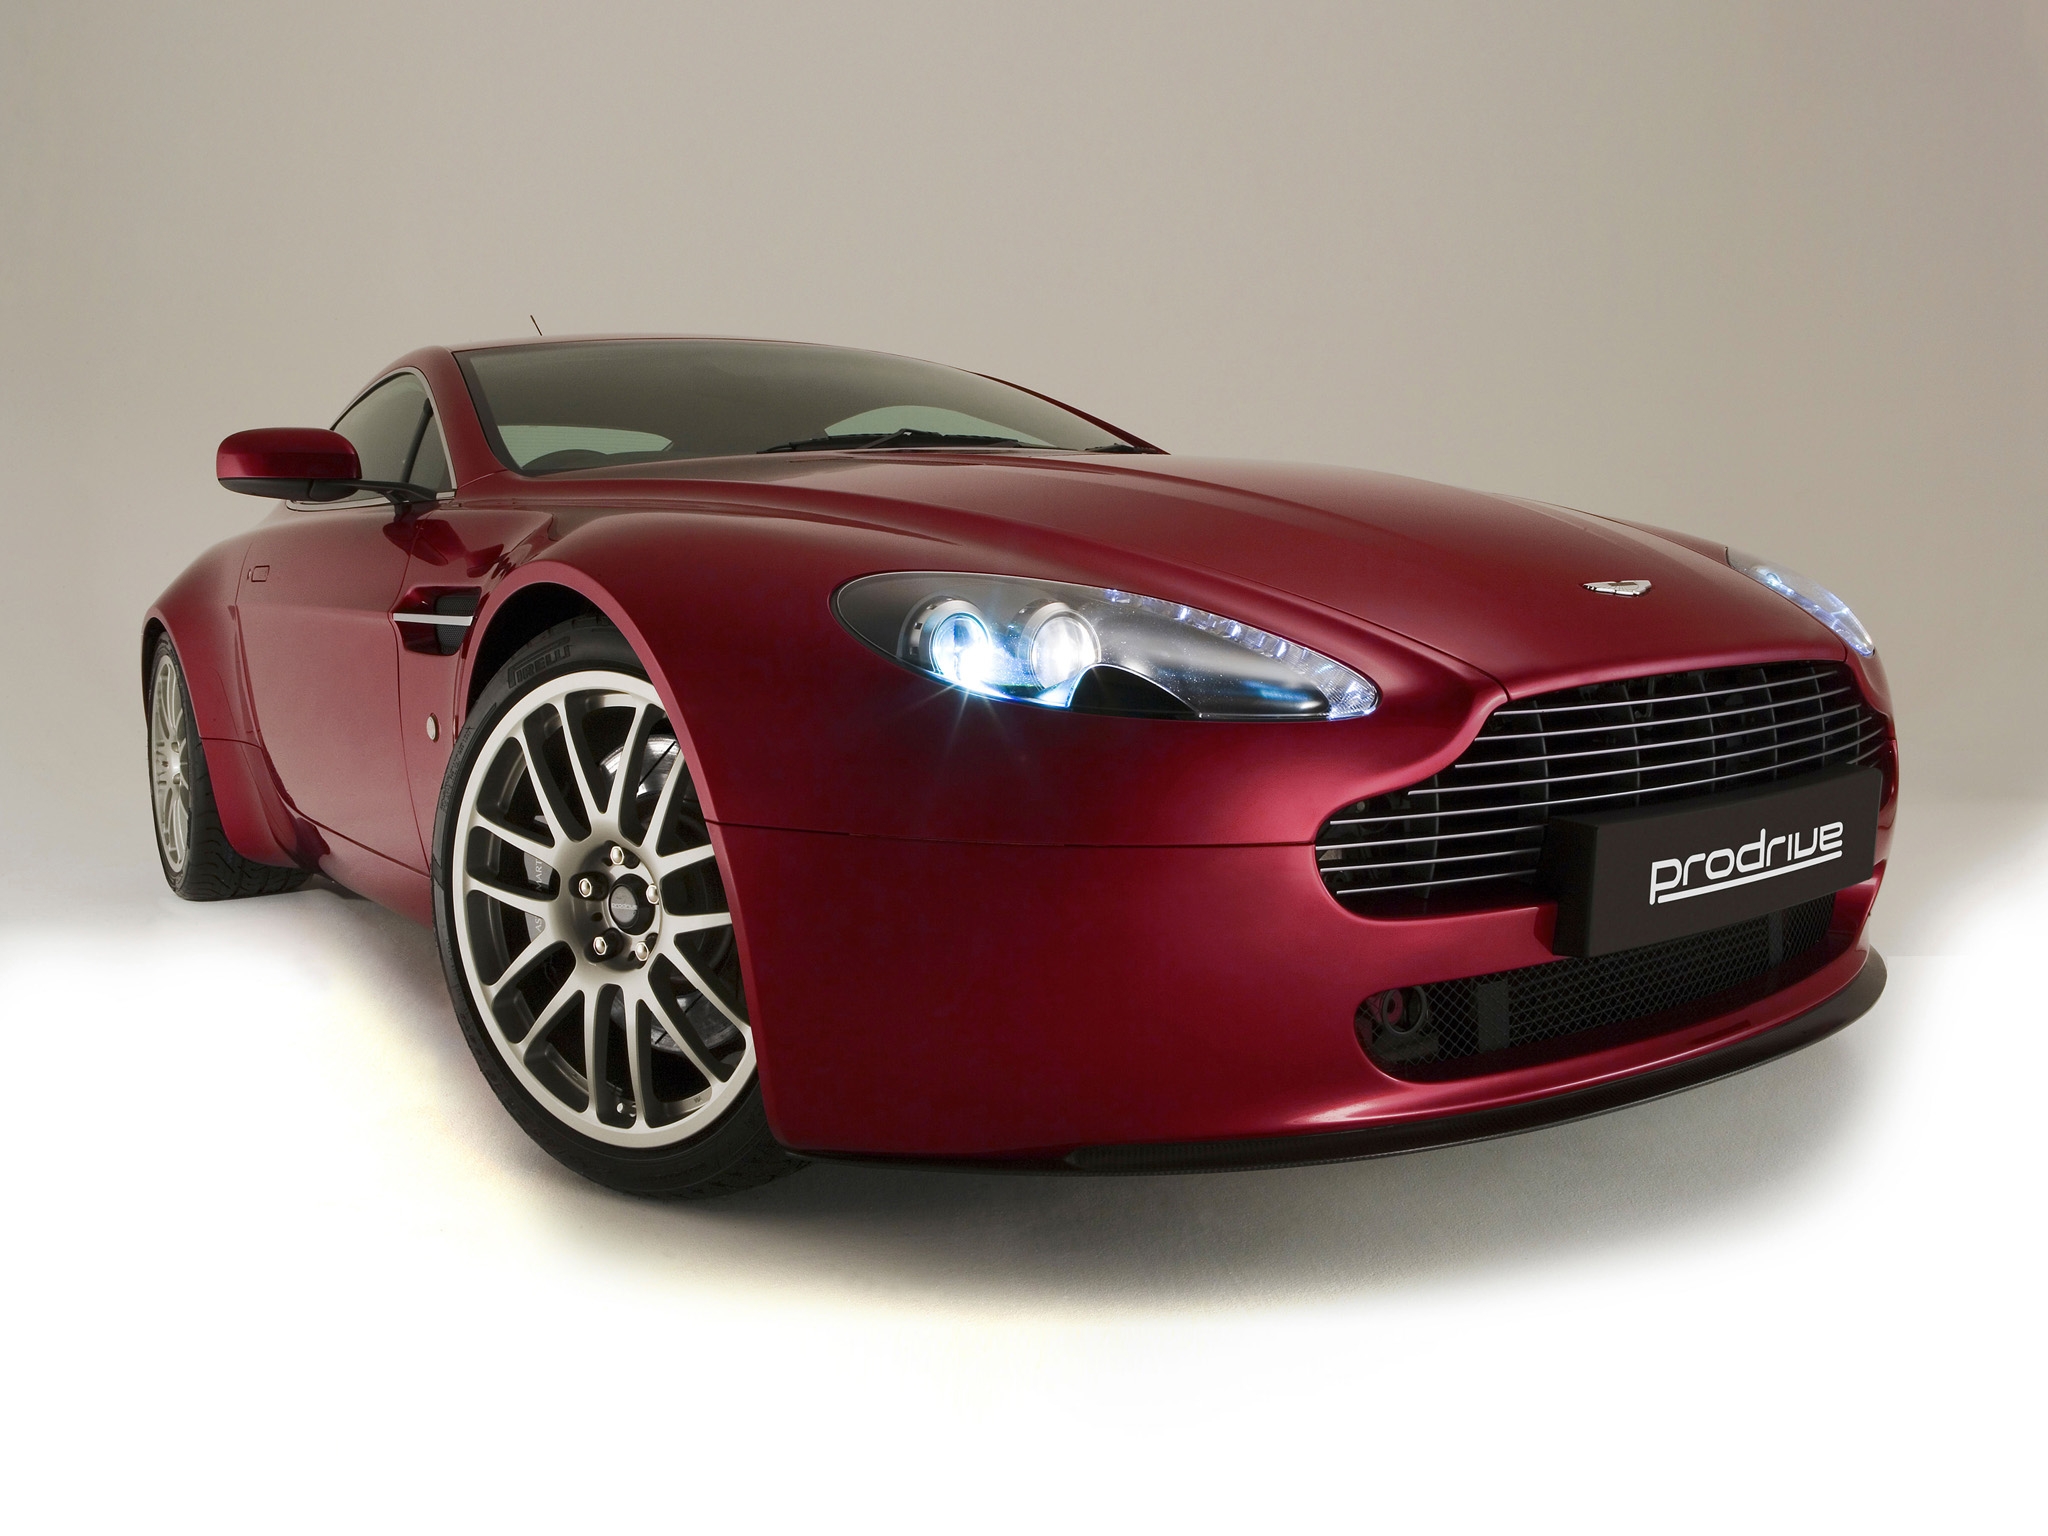 vertical wallpaper cars, cherry, aston martin, front view, style, 2007, v8, vantage